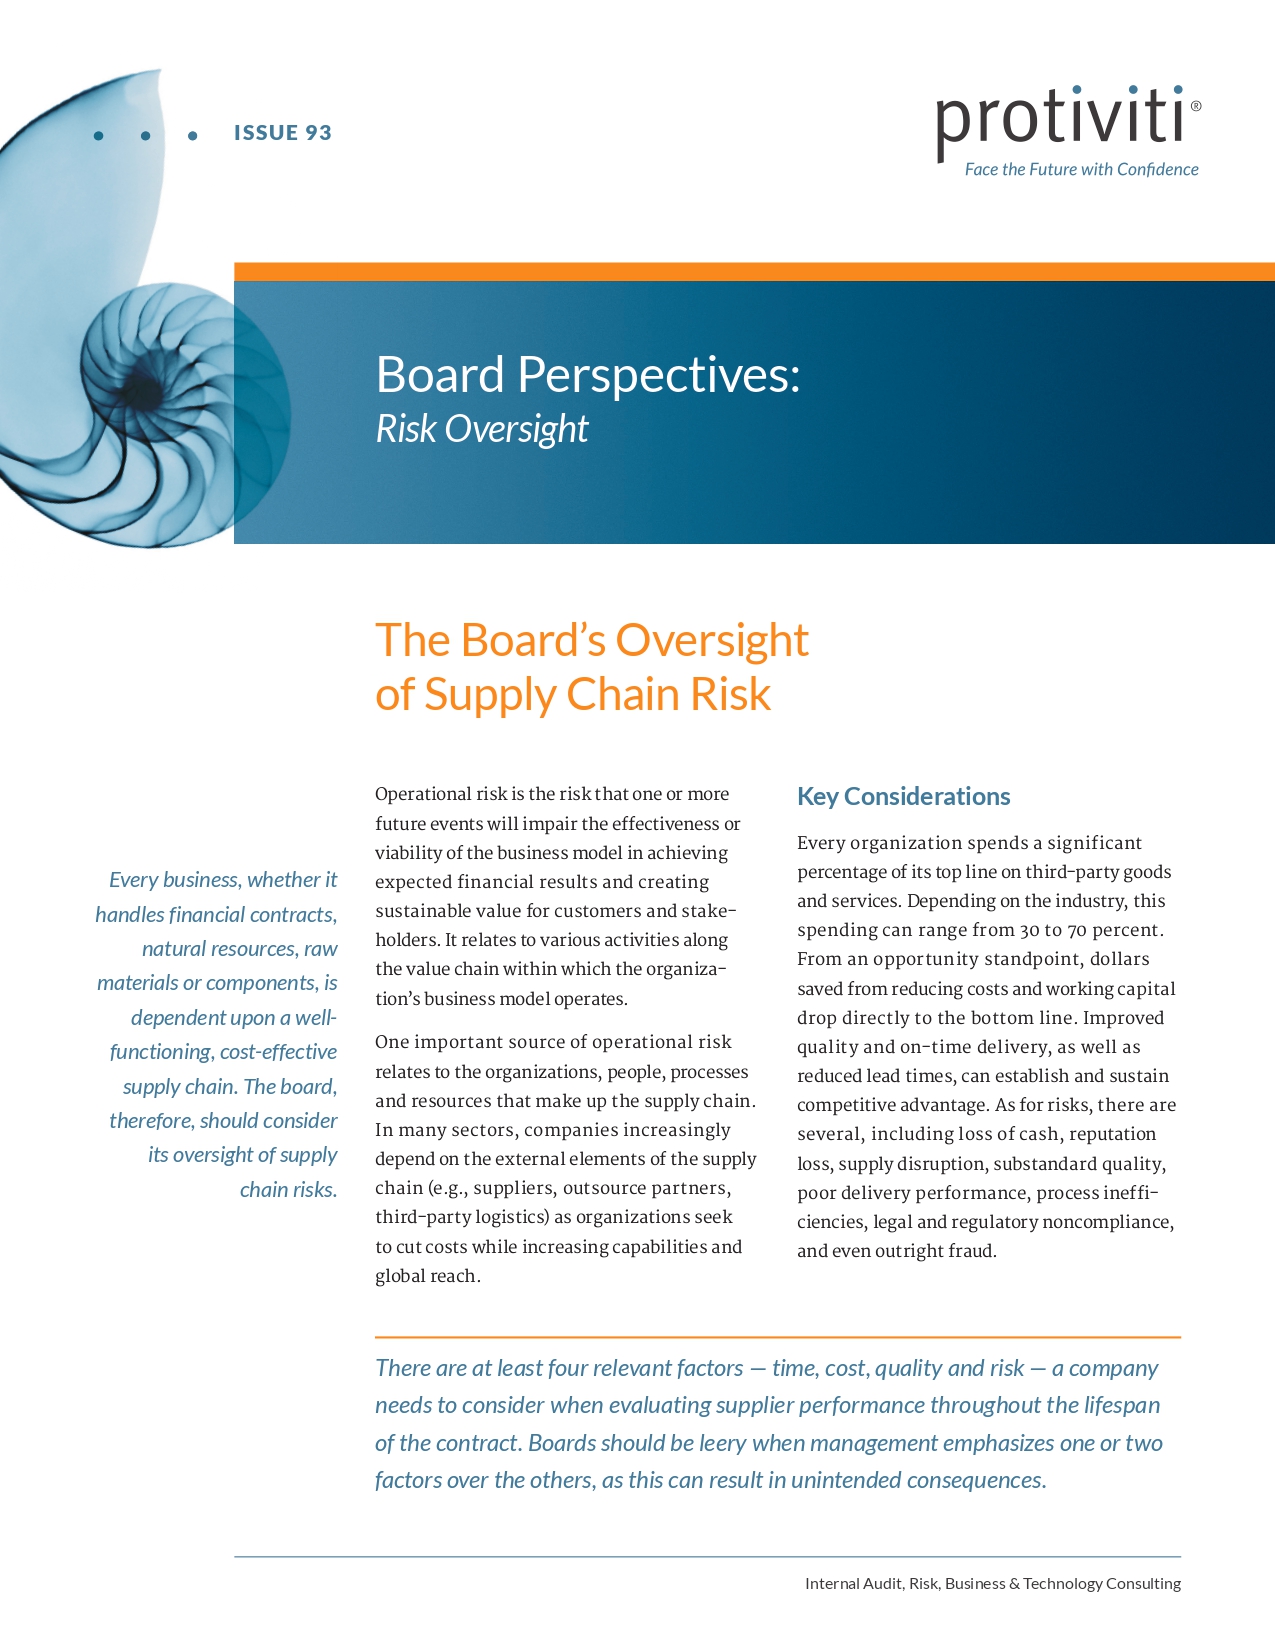 Screenshot of the first page of The Board’s Oversight of Supply Chain Risk